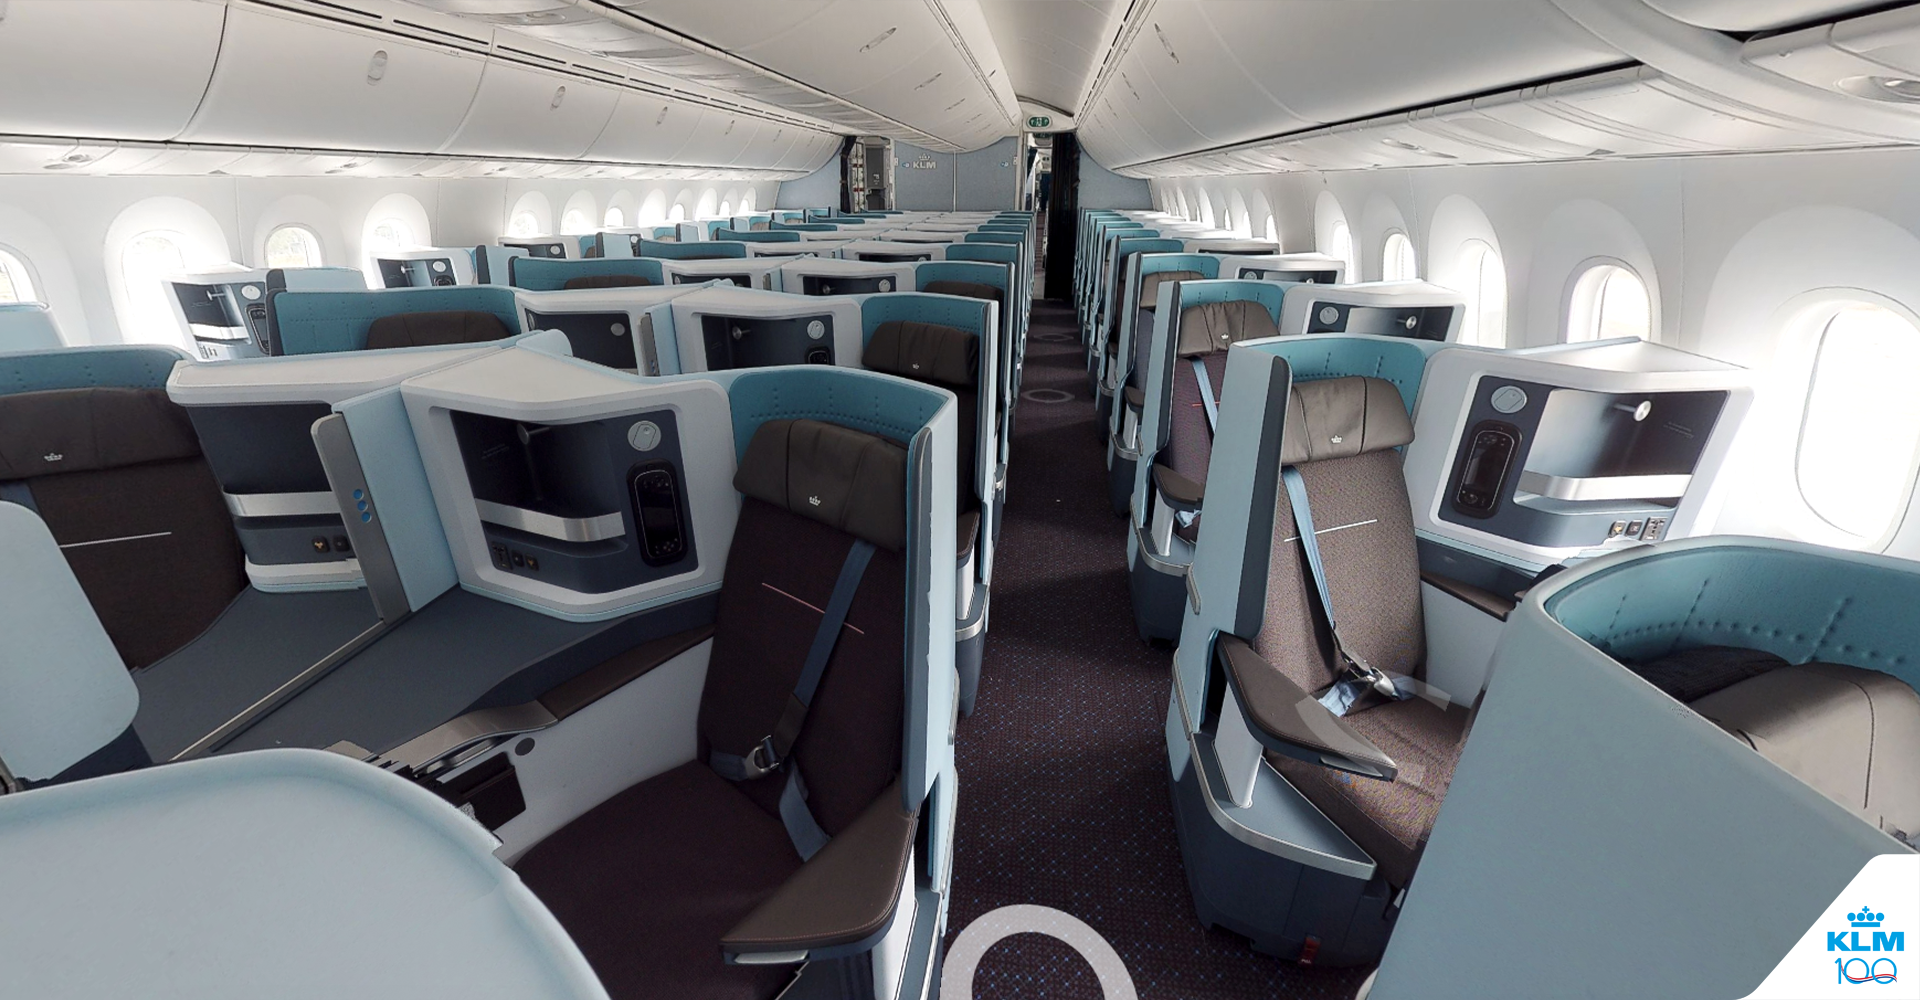 KLM business class on the 777